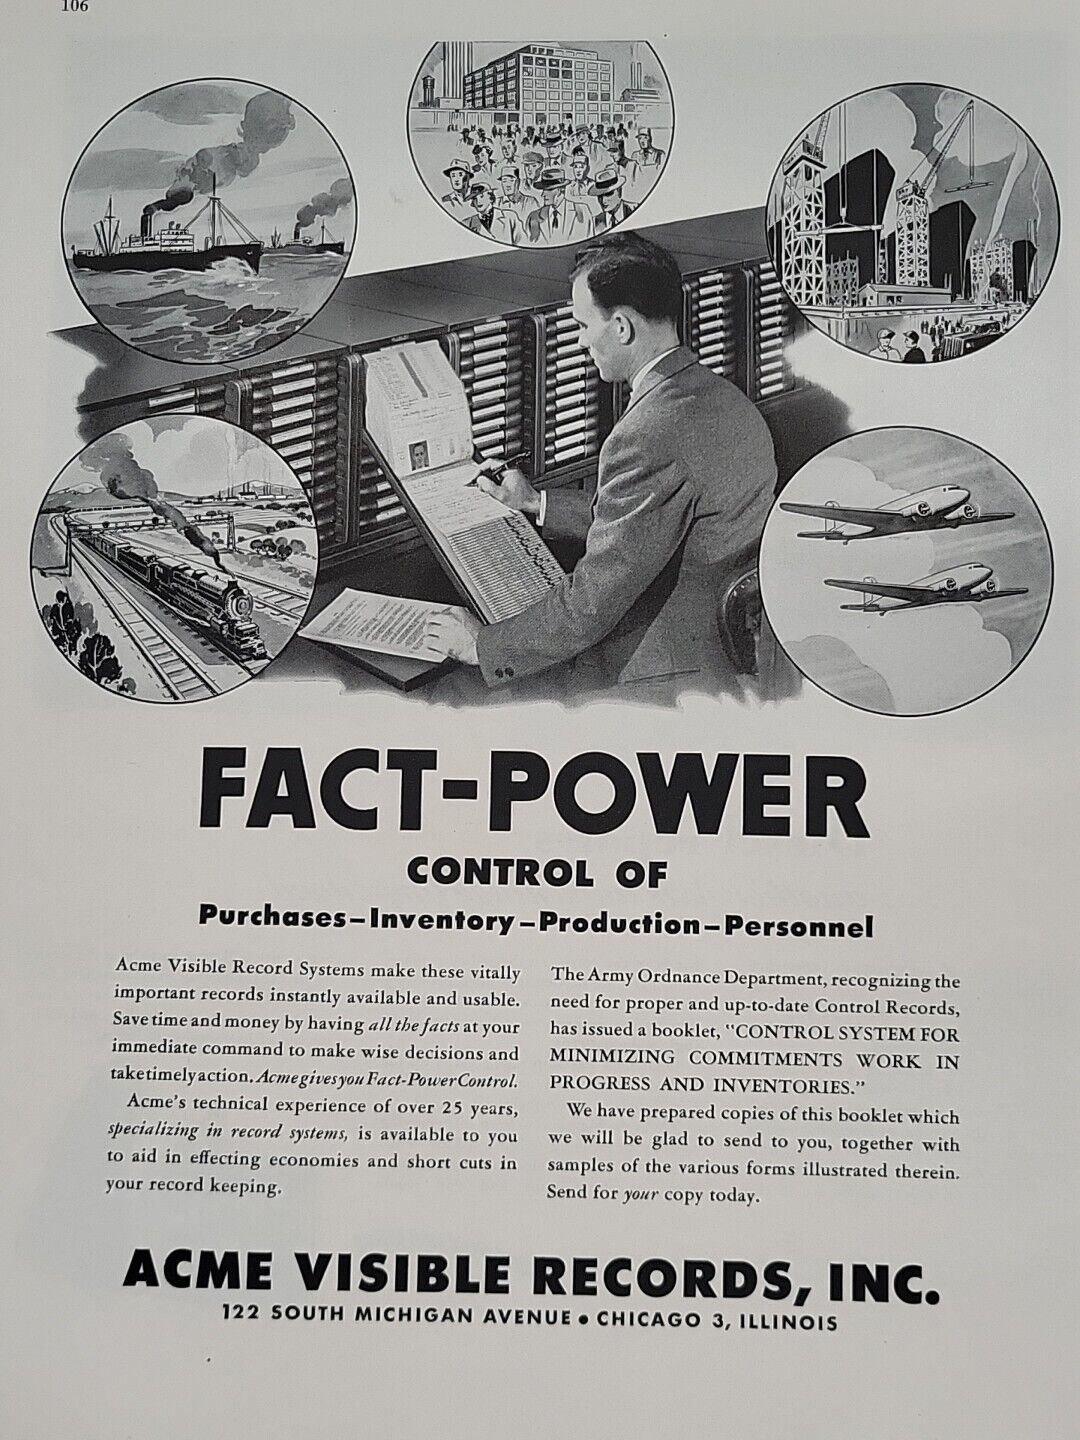 1943 ACME Visible Records, Inc. Fortune WW2 Print Ad FACT POWER Inventory CRM HR